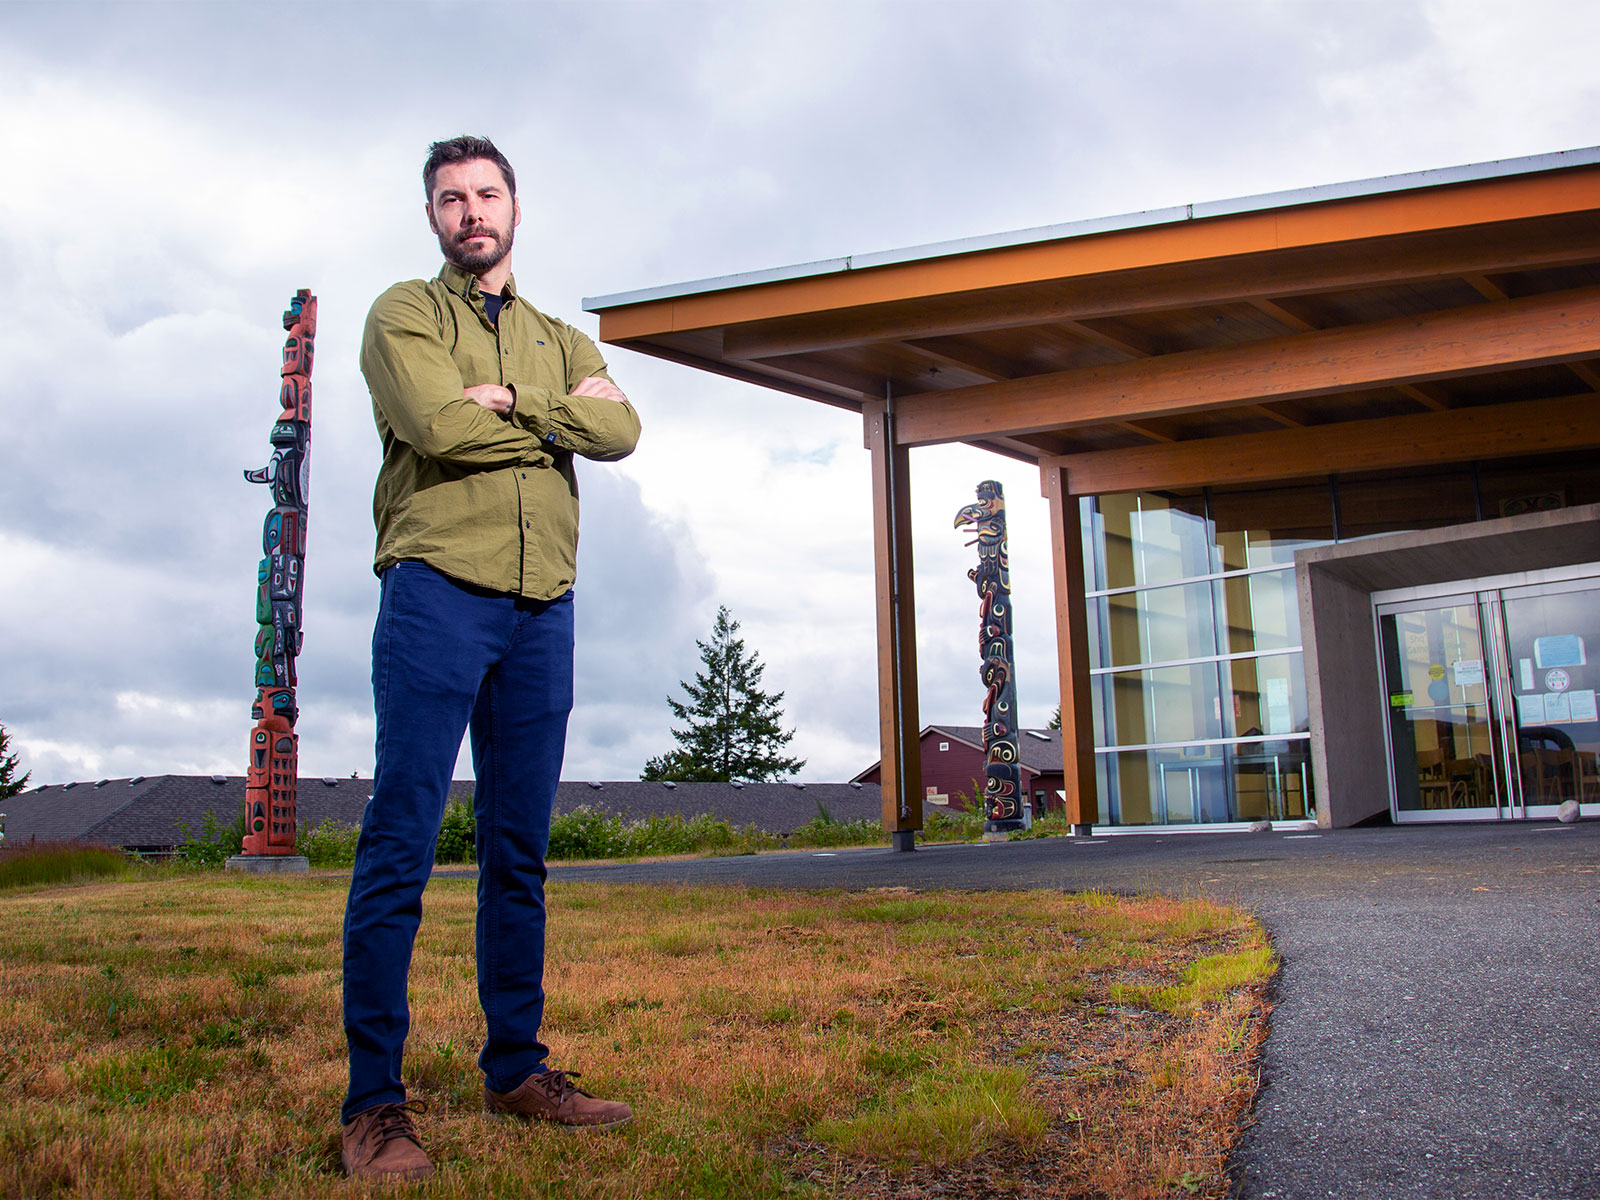 
                                A confident man with crossed arms stands in front of a modern building with large windows and two totem poles.